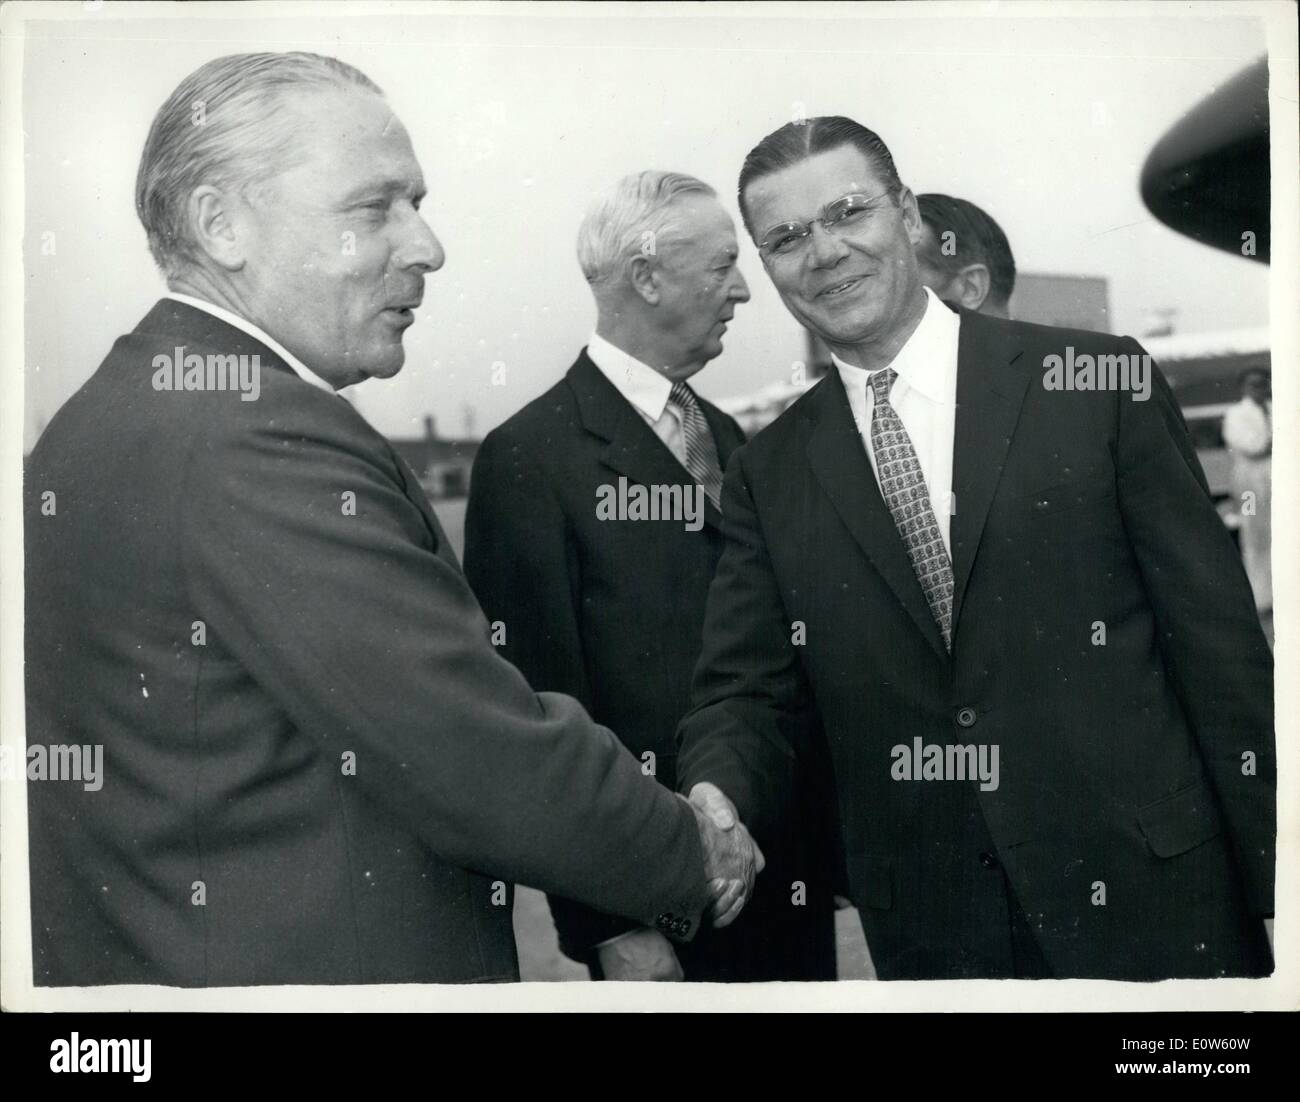 Jul. 24, 1961 - 24-7-61 U.S. Defence Secretary arrives for talks with Defence Minister overlooming Berlin Crisis. Mr. Robert McNamara, the United States Defence Secretary, arrived at London Airport this afternoon for talks with the U.K. Minister of Defence, Mr. Harold Watkinson. They will discuss the looming Berlin crisis. Photo Shows: Mr. Watkinson greeting Mr. McNamara at London Airport this afternoon. Stock Photo